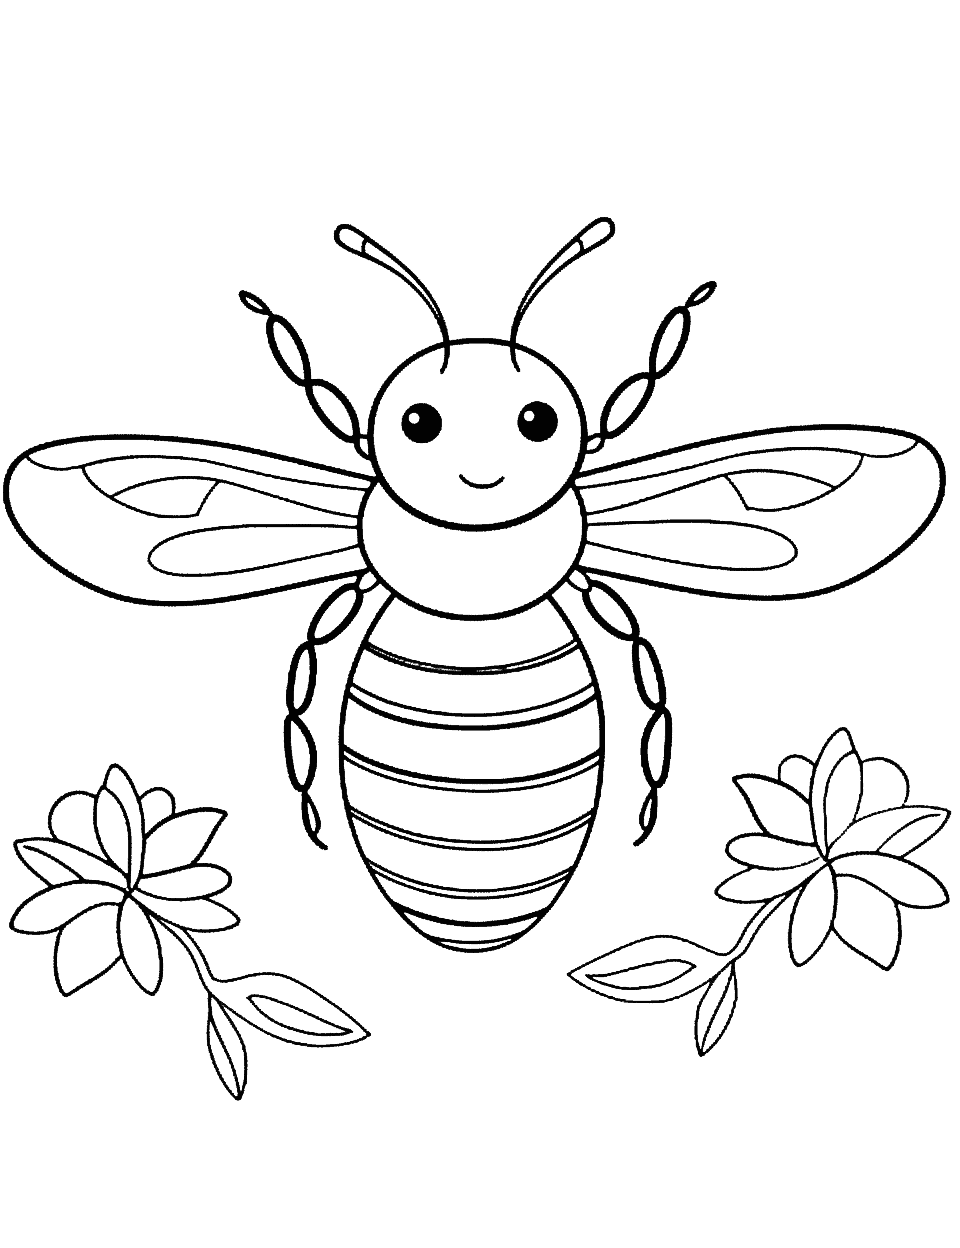 Busy Bee Animal Coloring Page - A bee collecting nectar from a flower, surrounded by buzzing activity.